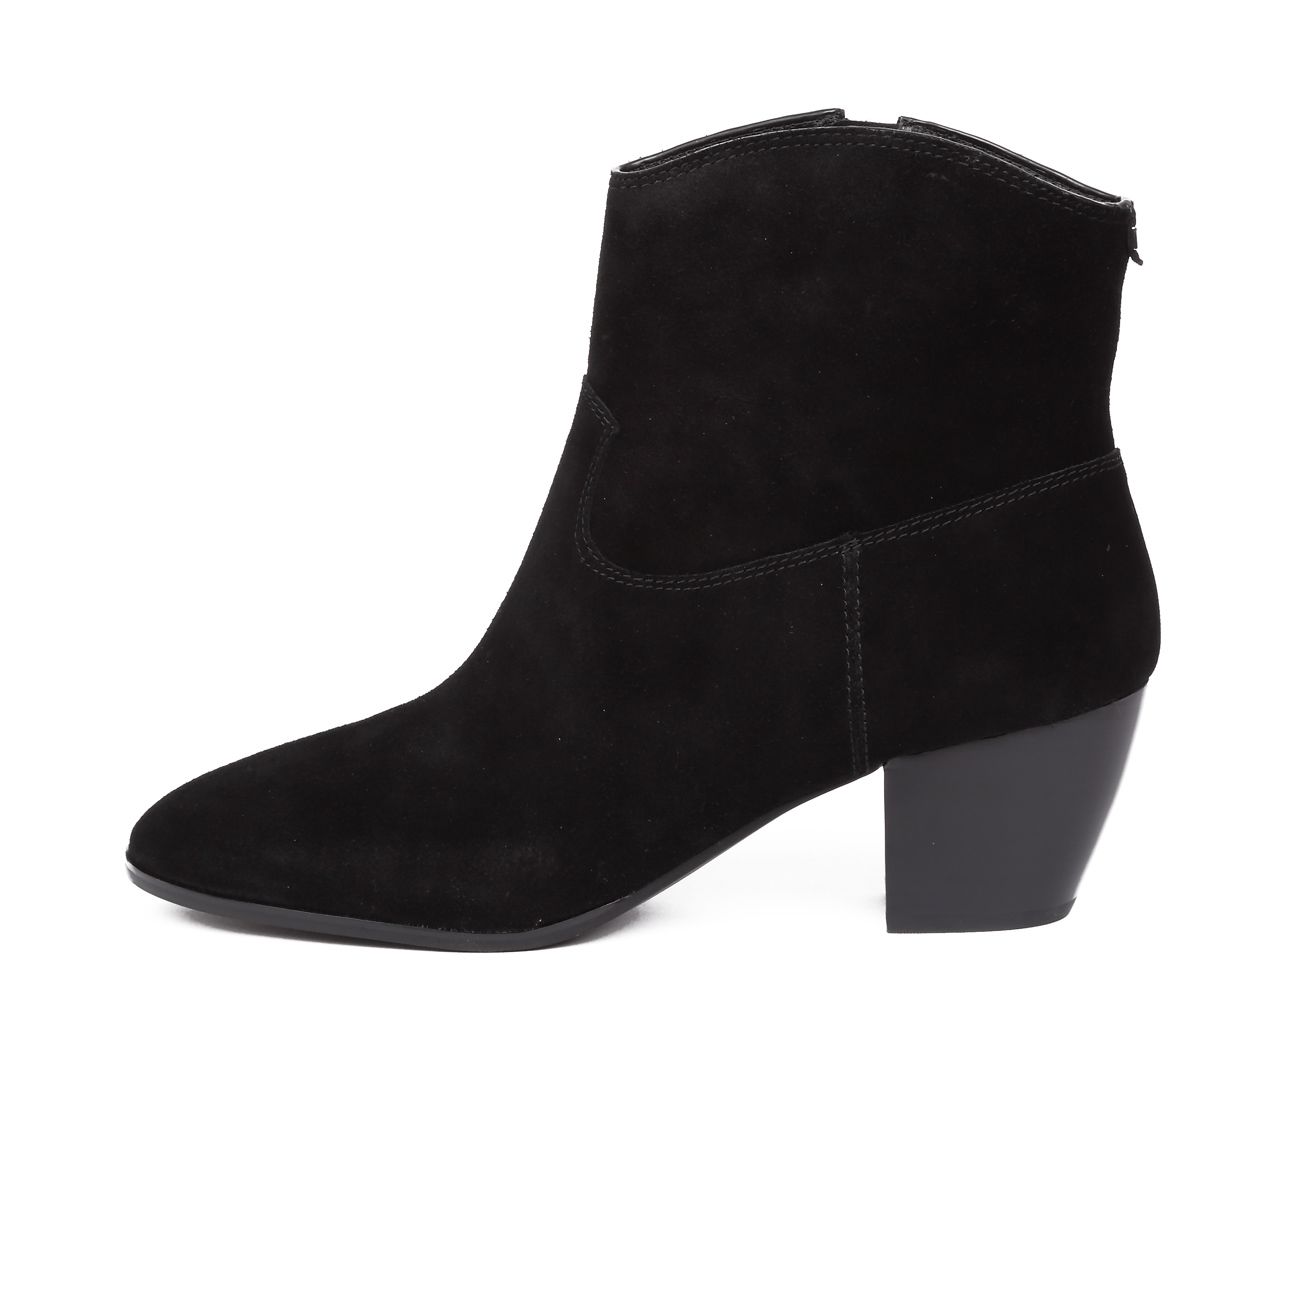 MICHAEL KORS AVERY ANKLE SUEDE BOOT 